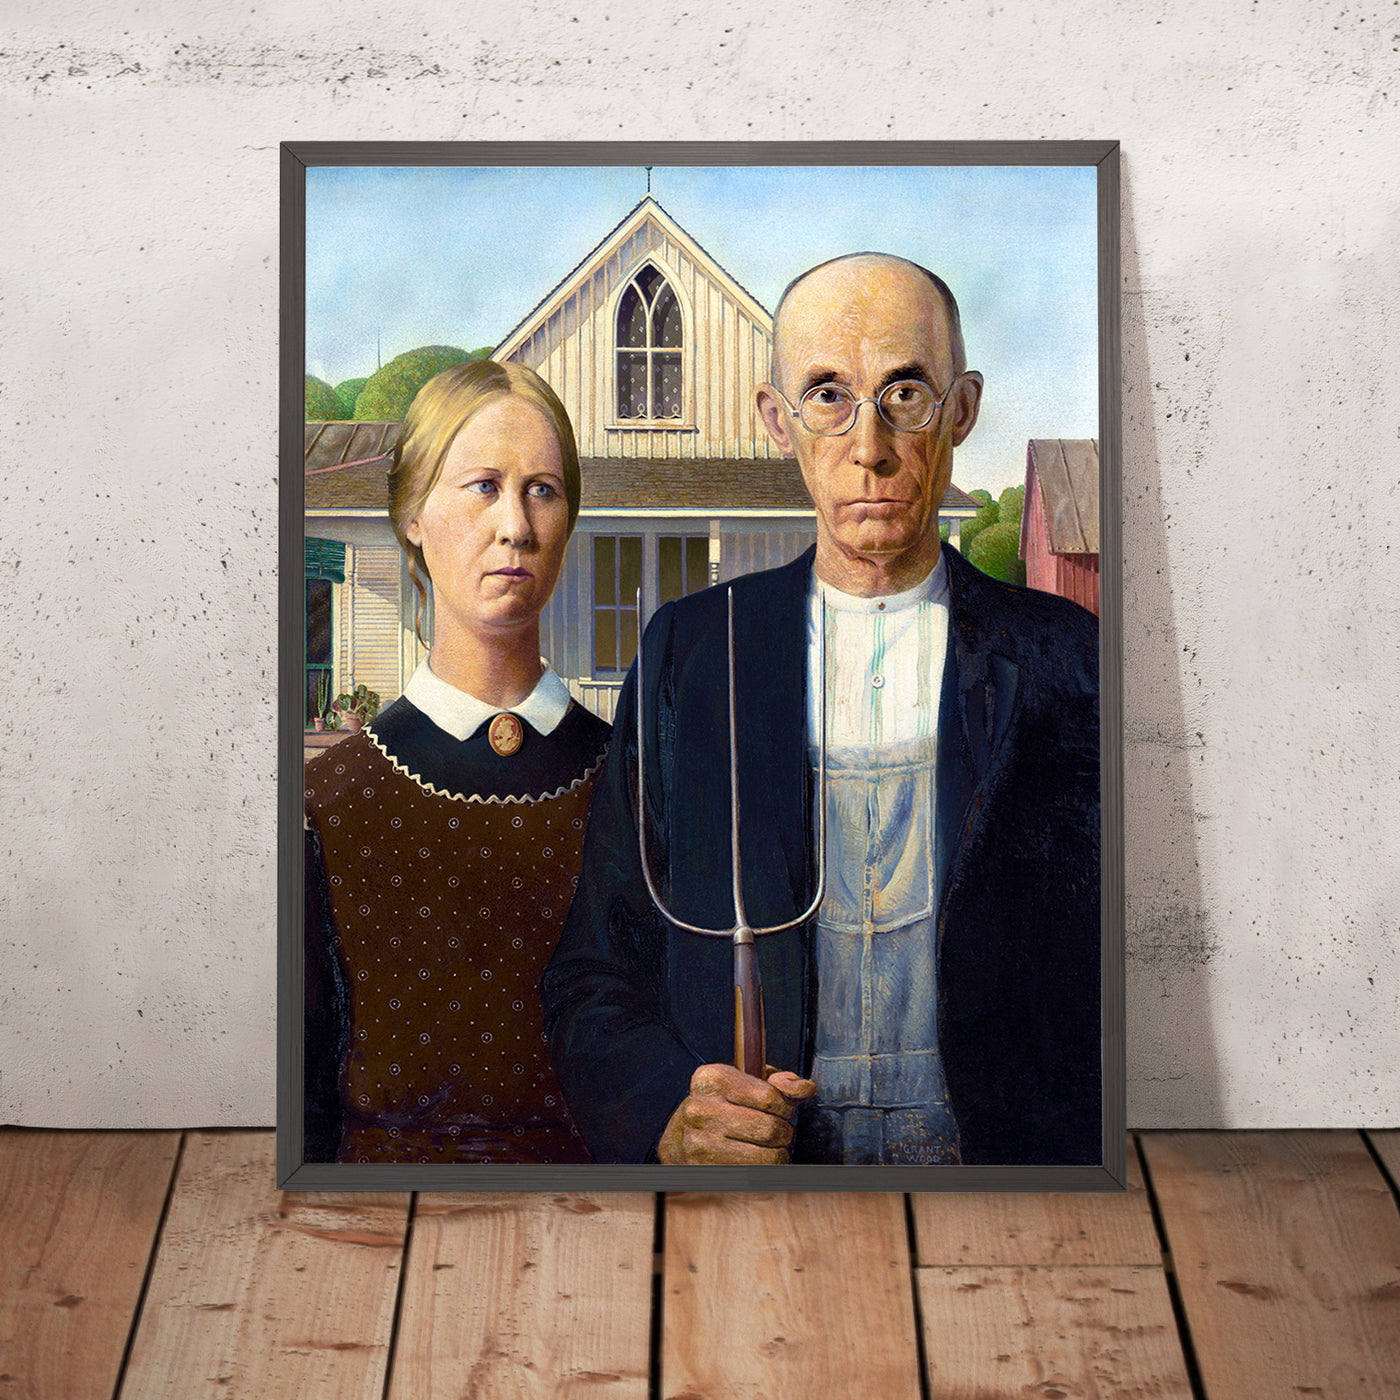 American Gothic by Grant Wood, 1930